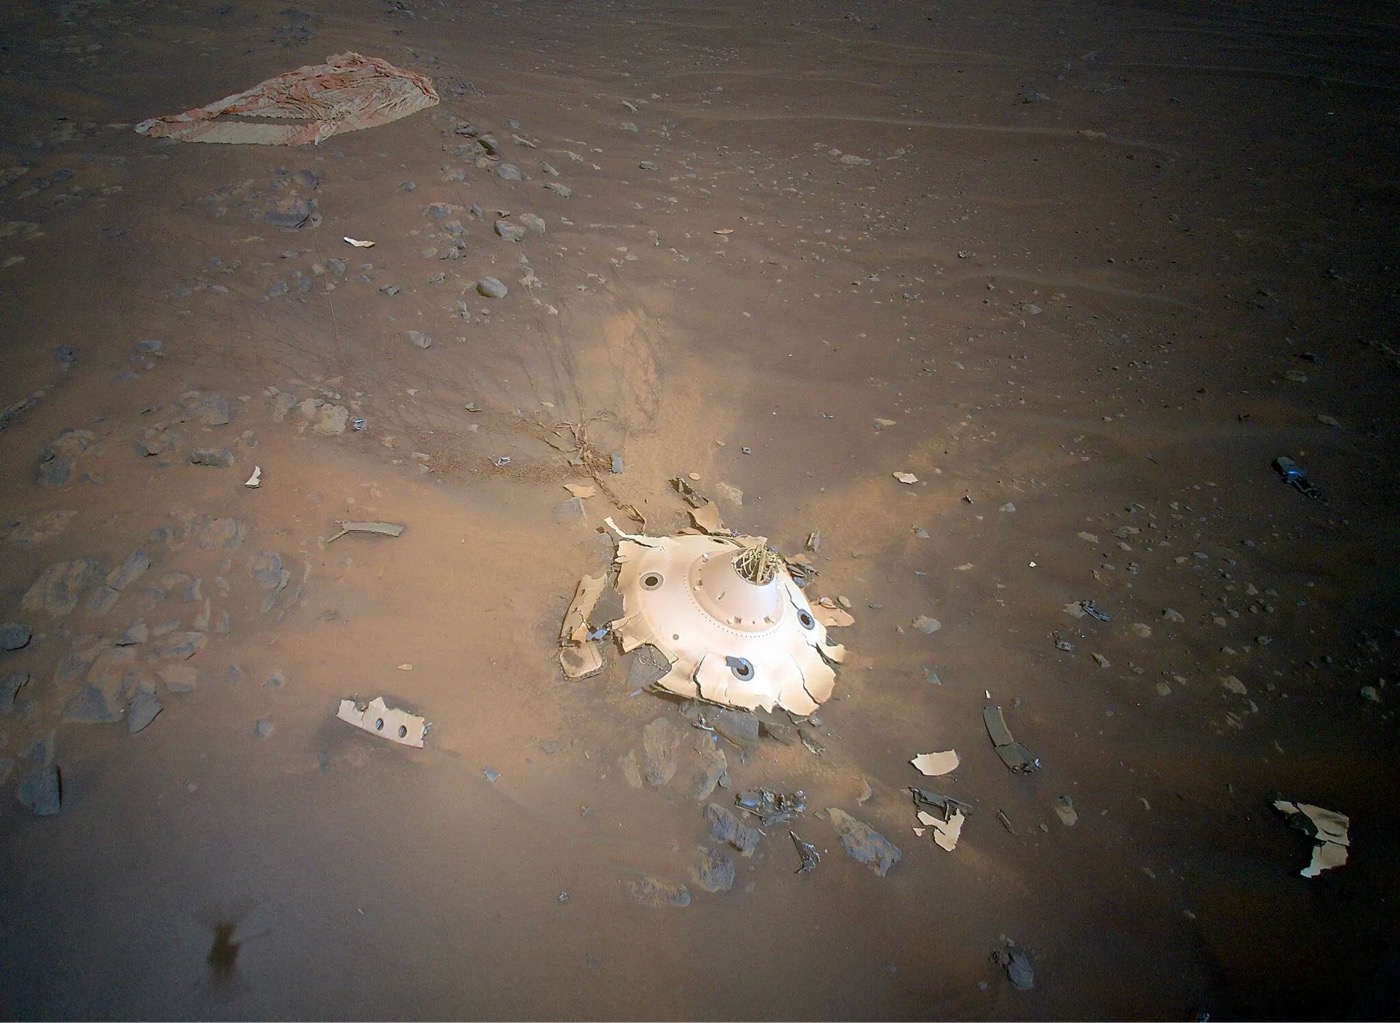 wreckage from the landing of NASA's Perseverance rover on Mars